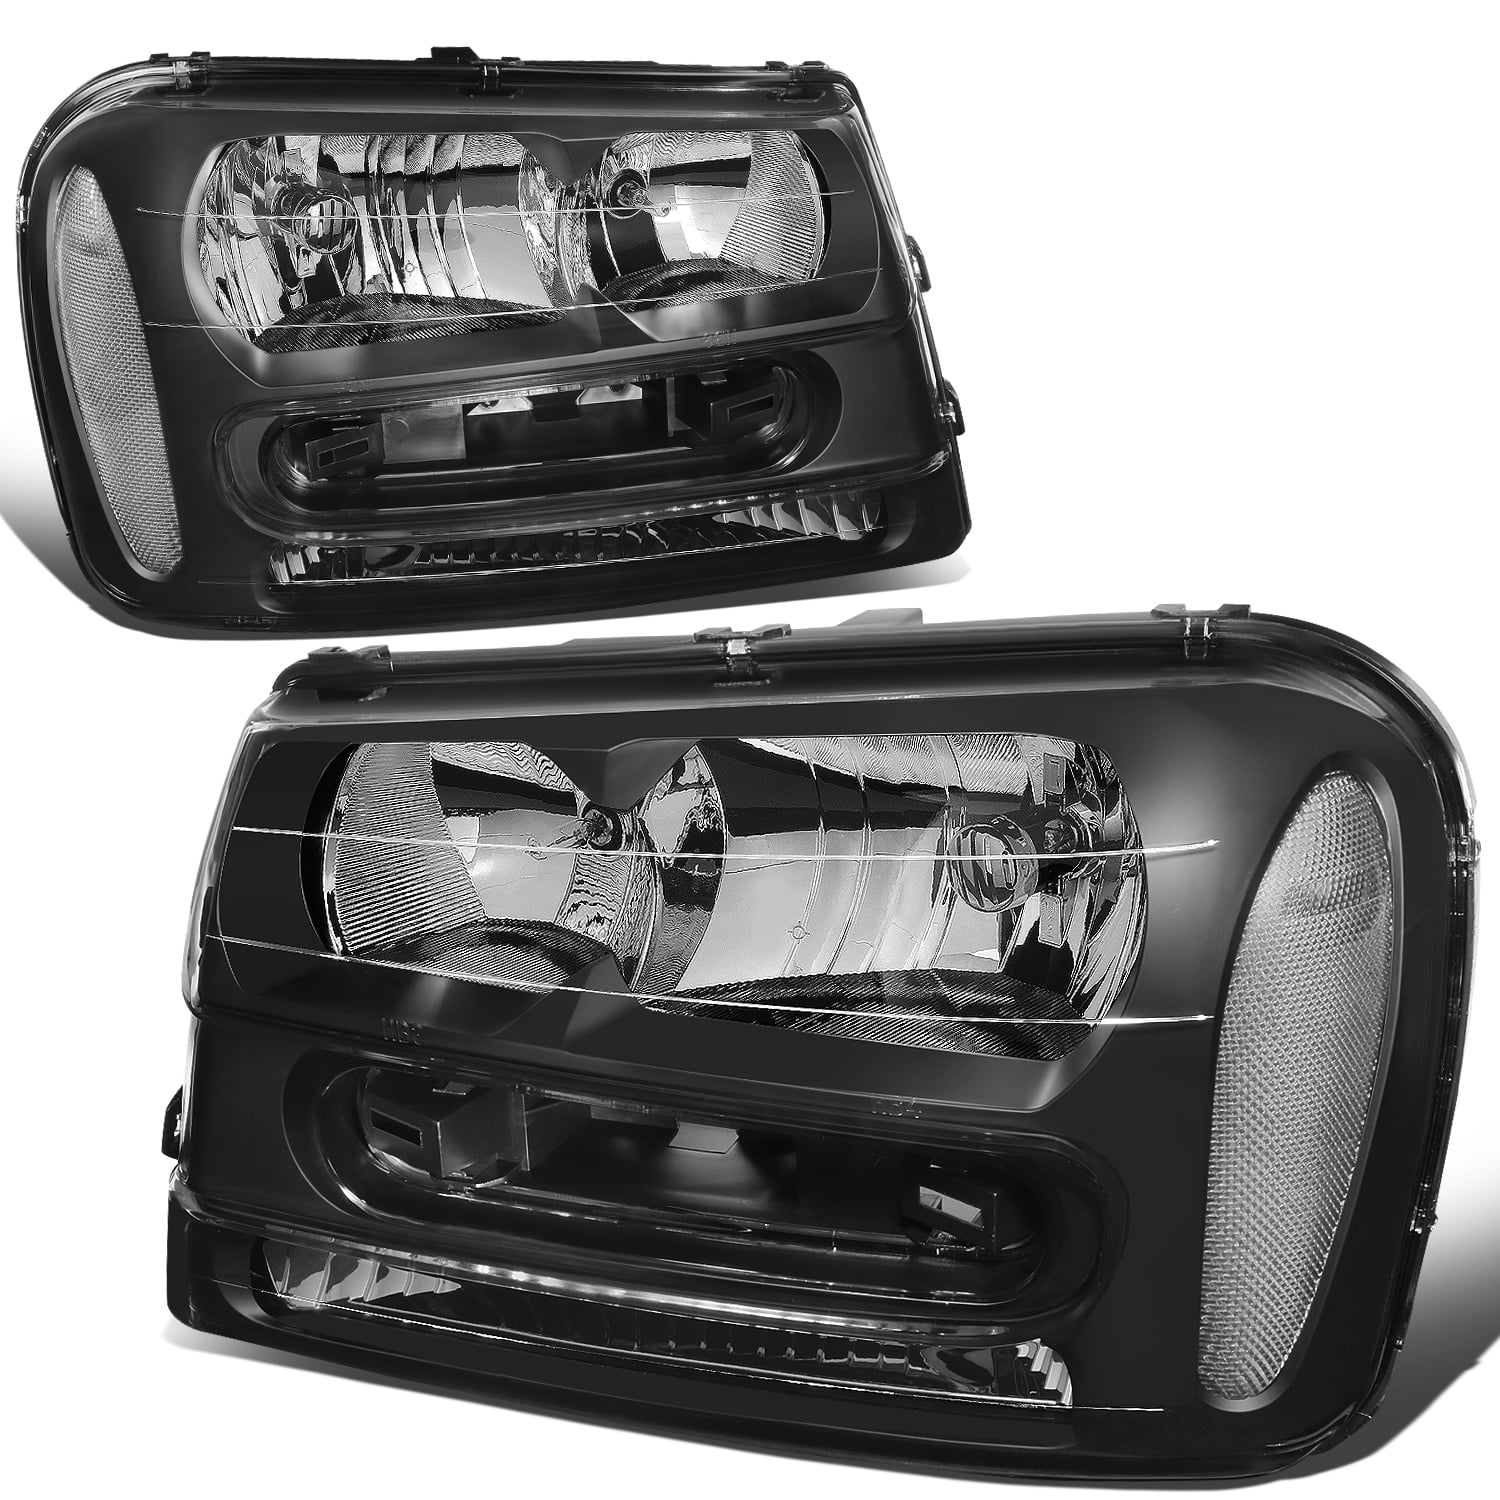 DNA Motoring HL-OH-TRA02-BK-CL1 Black Housing Clear Corner Headlights Replacement For 02-09 Trailblazer 